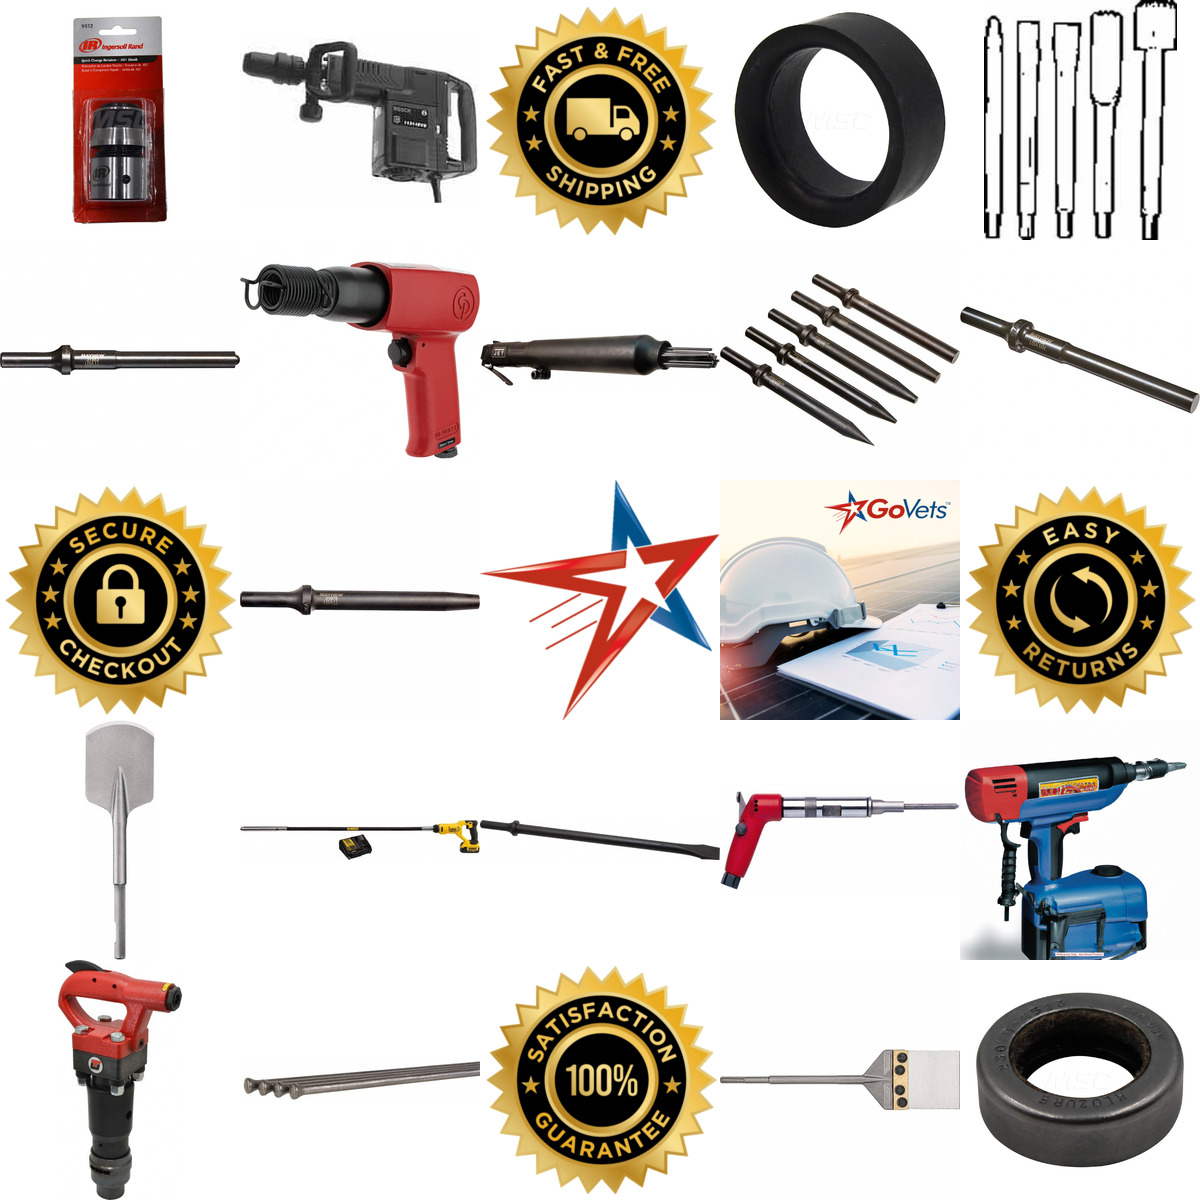 A selection of Hammers Chippers and Scalers products on GoVets